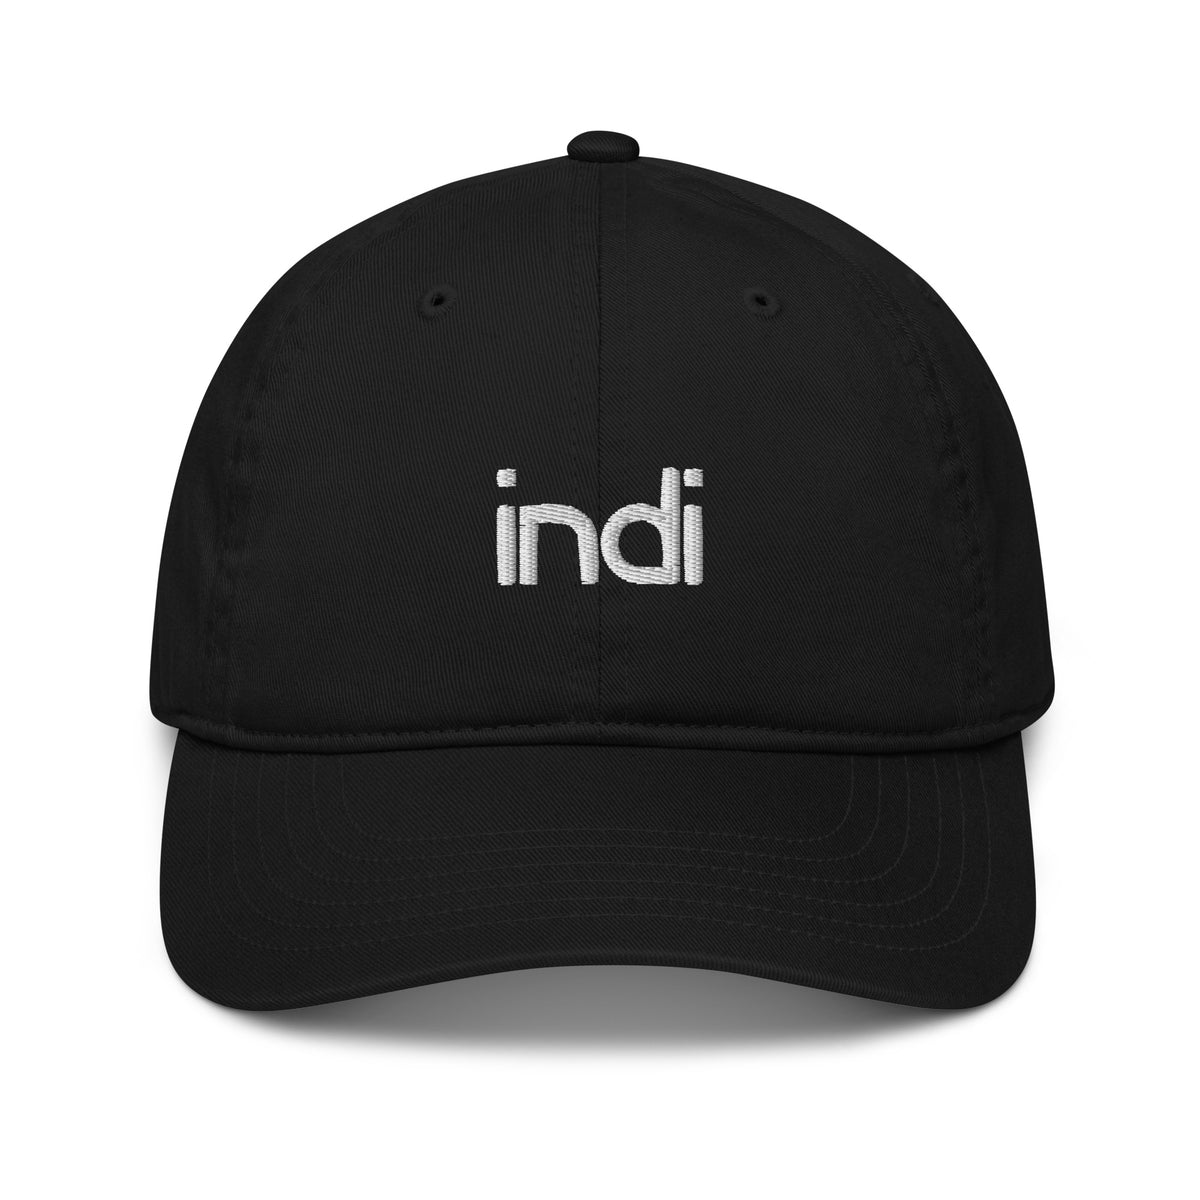 White-on-Black Daily Hat